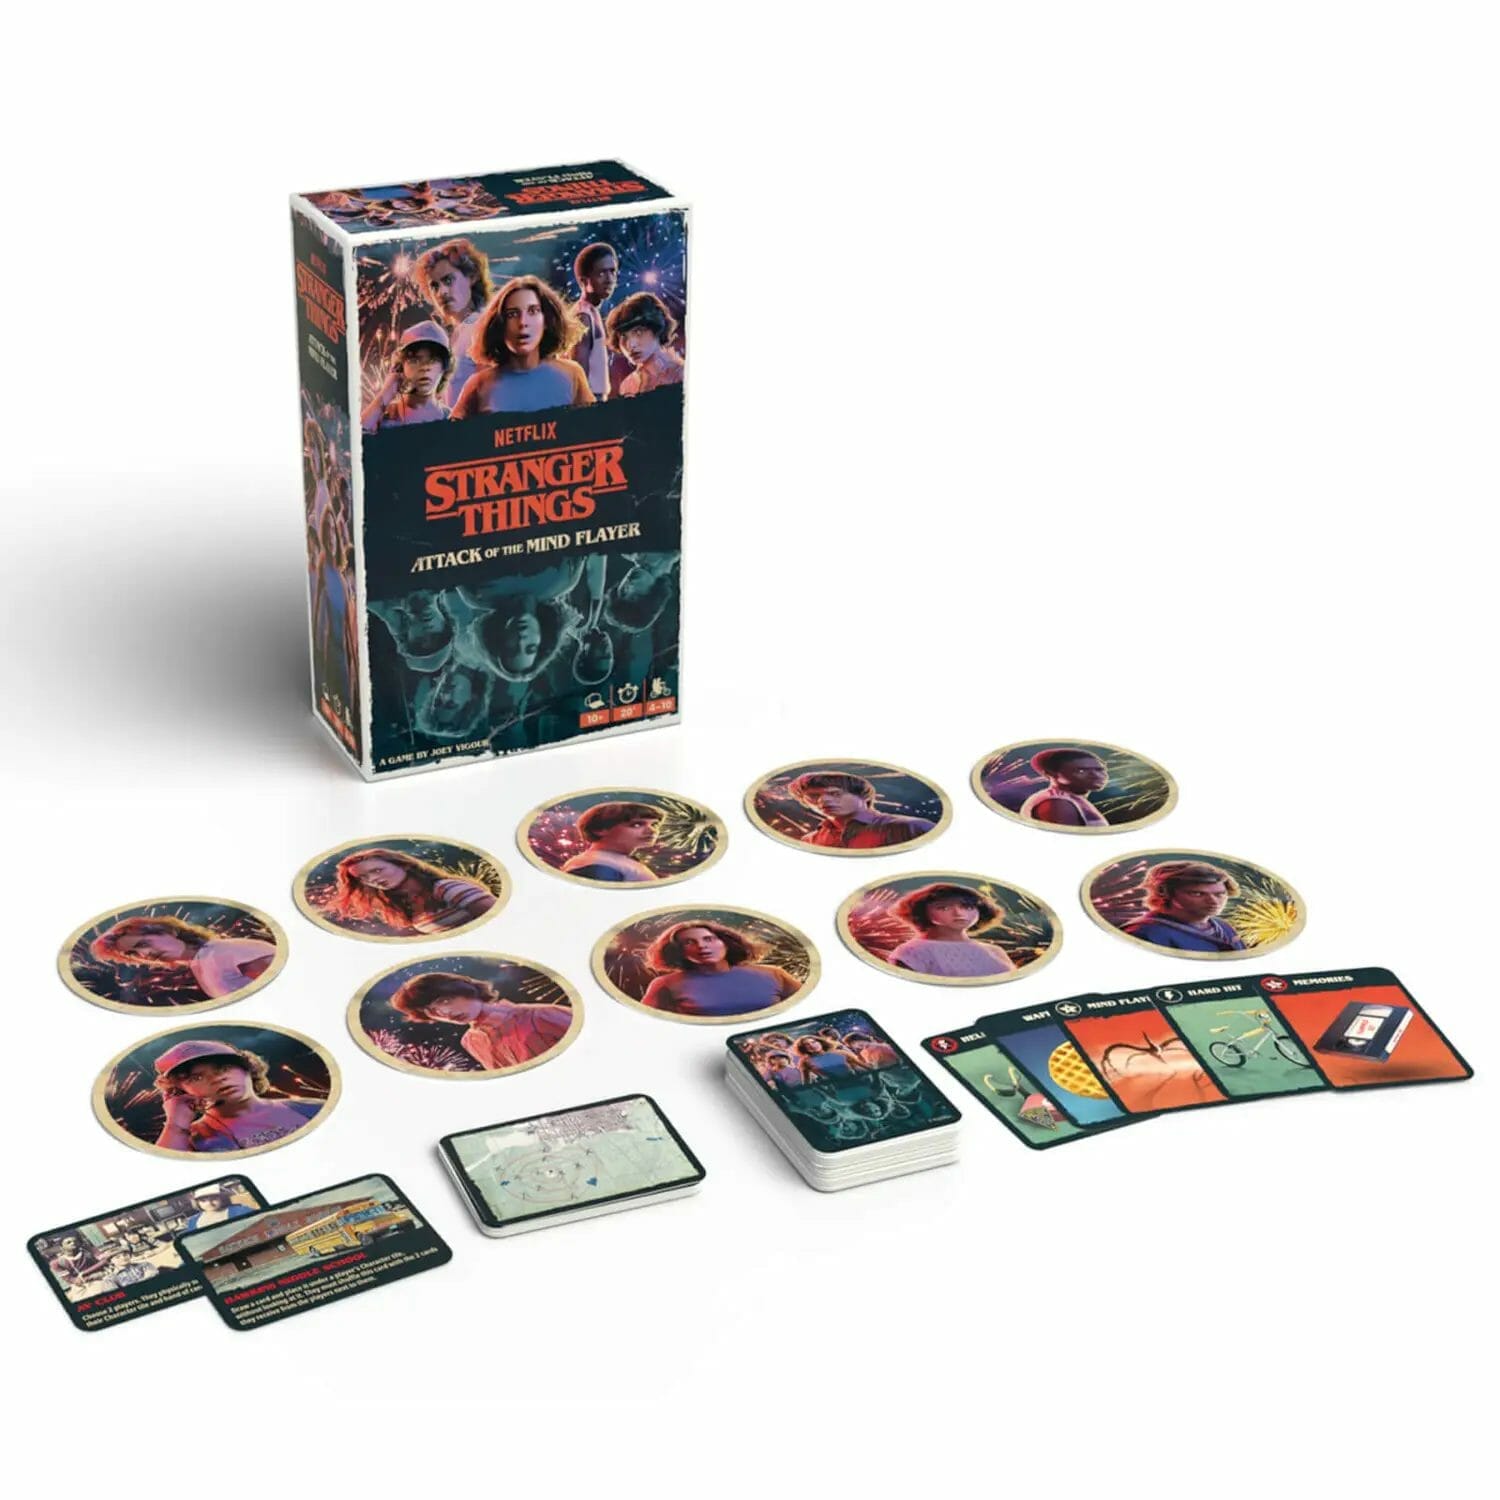 Attack of the Mind Flayer: The Stranger Things game